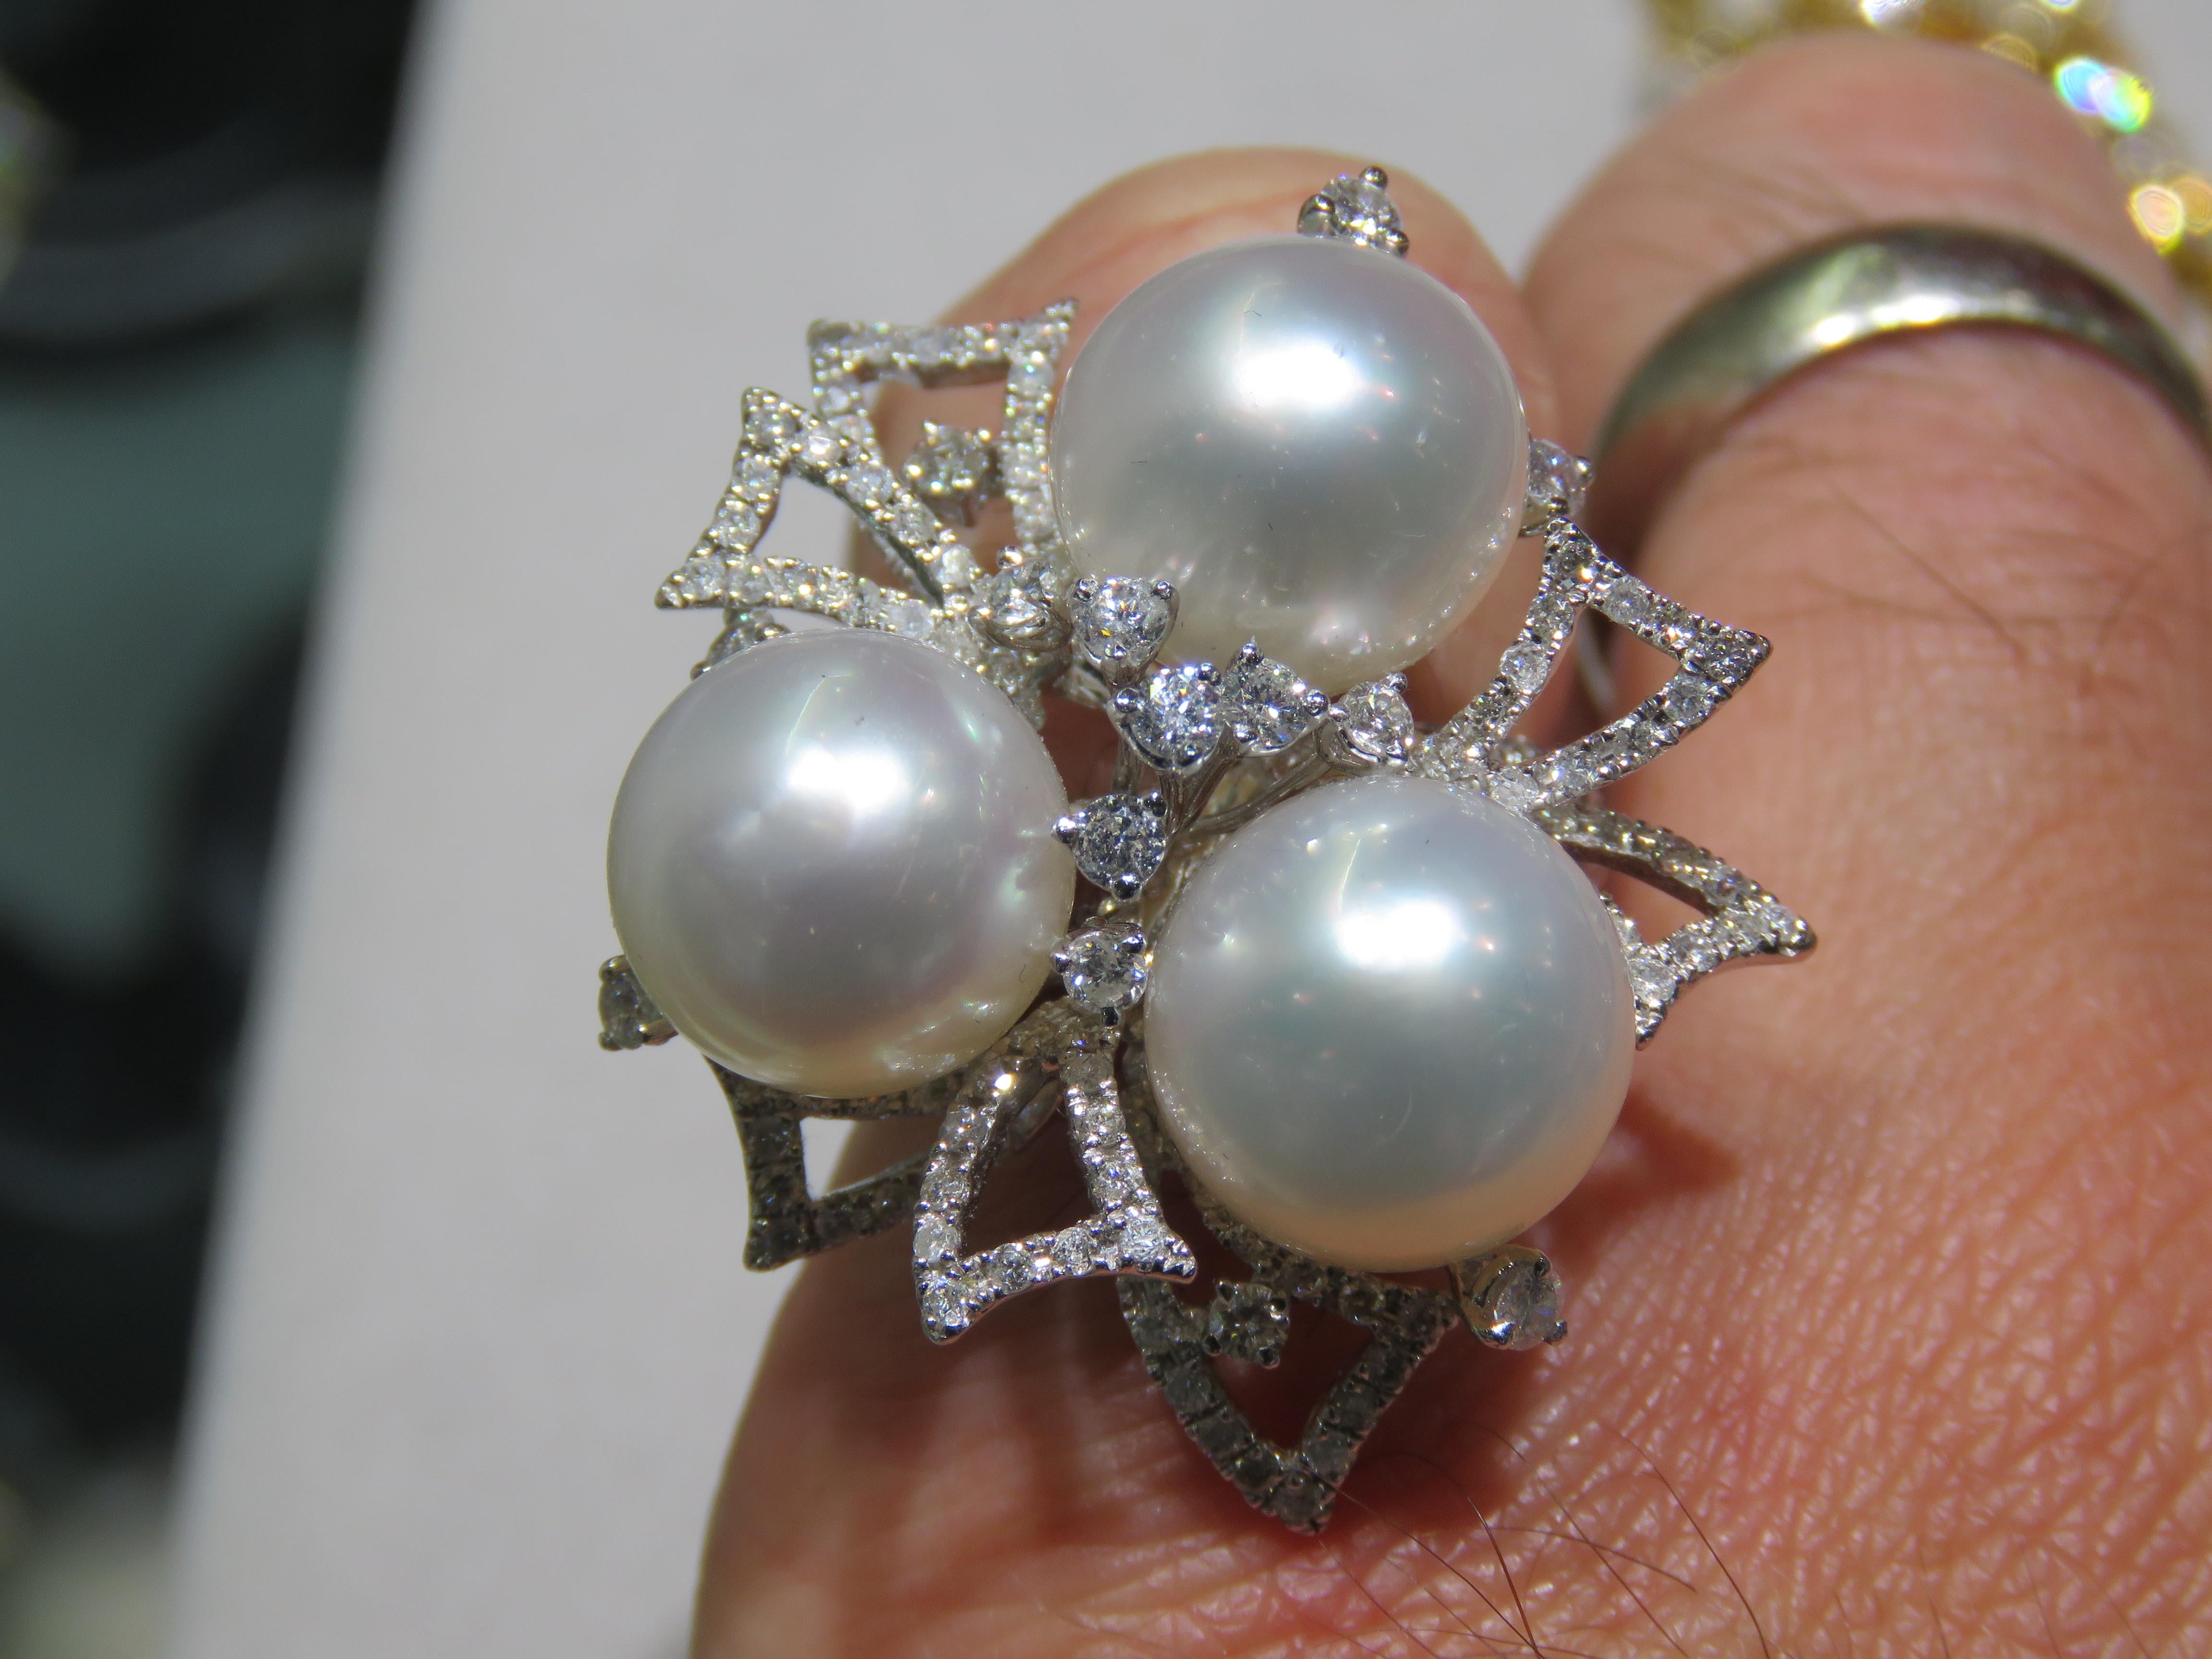 The Following Item we are offering is this Extremely Rare Beautiful 18KT Gold Fine Rare Fancy Large South Sea Pearl Fancy Diamond Ring. This Magnificent Ring is comprised of Rare Fine Large 11-12MM Fancy South Sea Pearls surrounded with Gorgeous